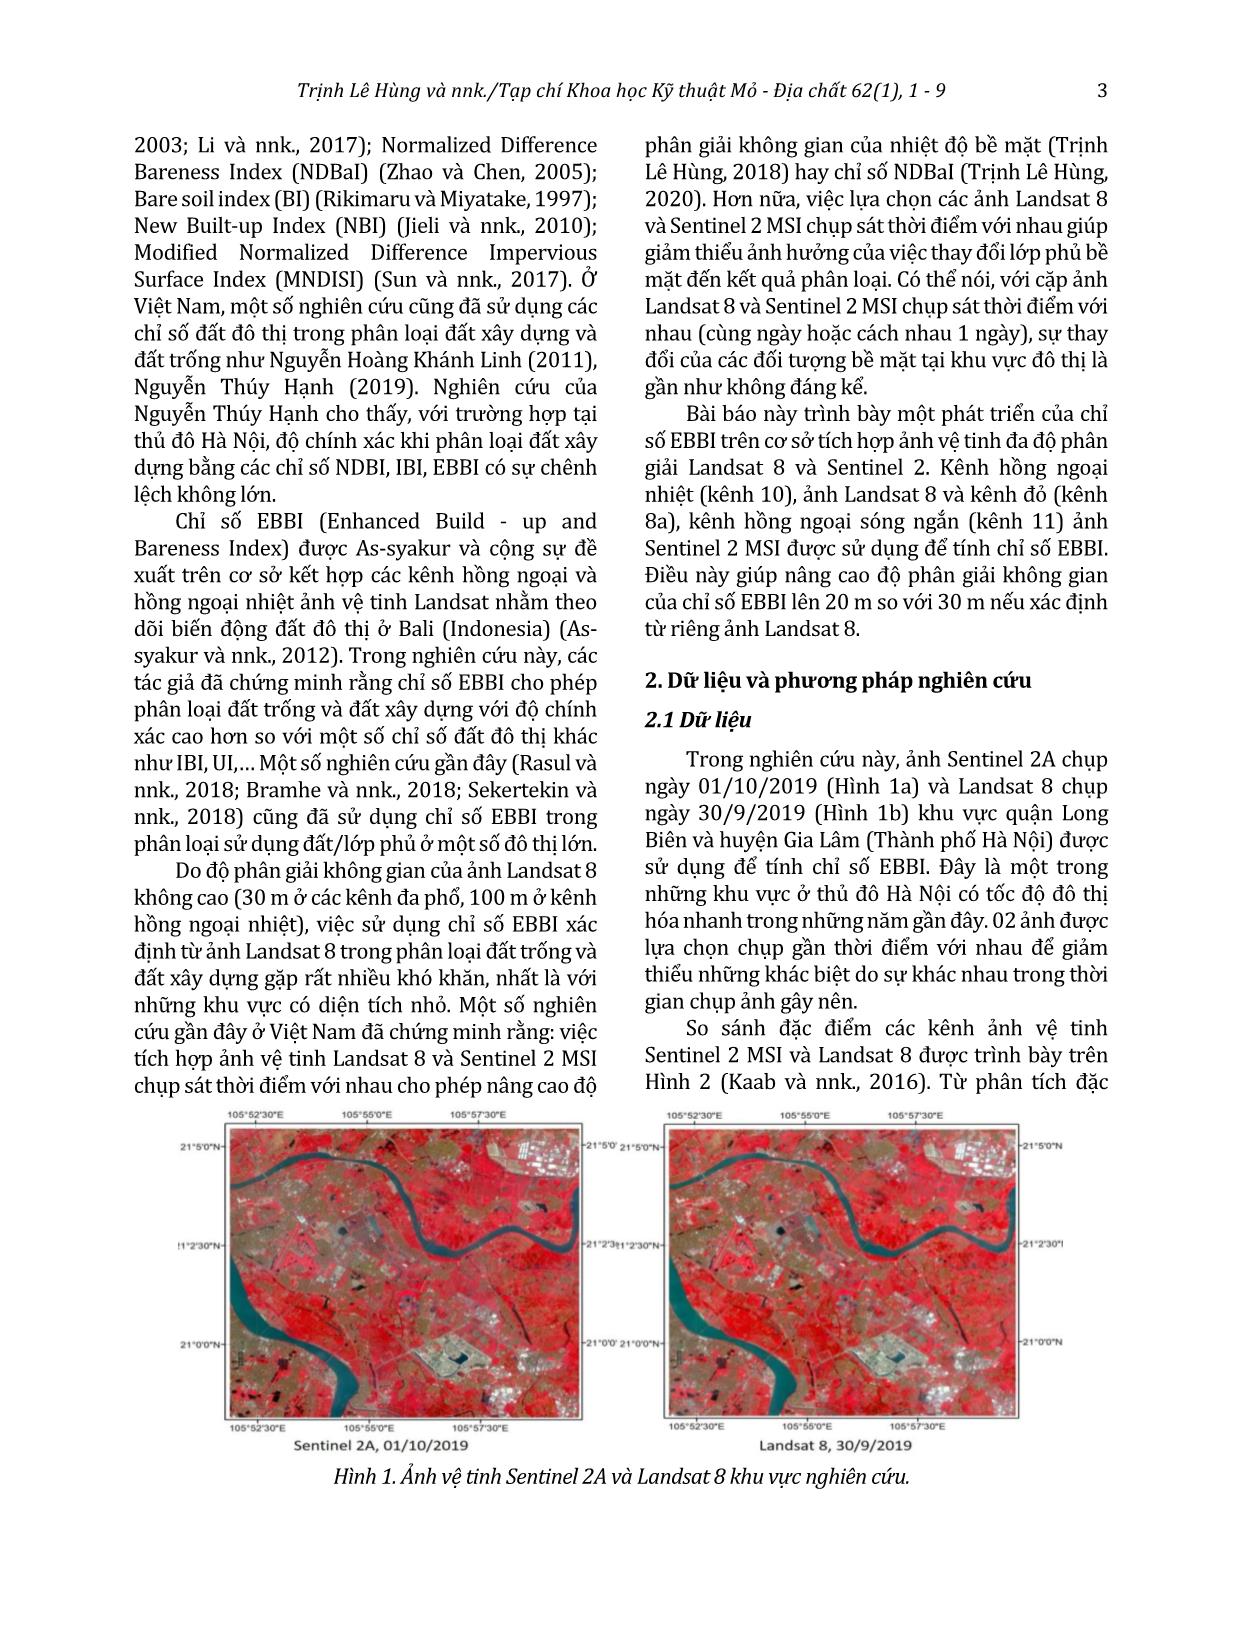 A development of the Enhanced Built-Up and Bareness Index (EBBI) based on combination of multi-resolution Landsat 8 and Sentinel 2 MSI images trang 3